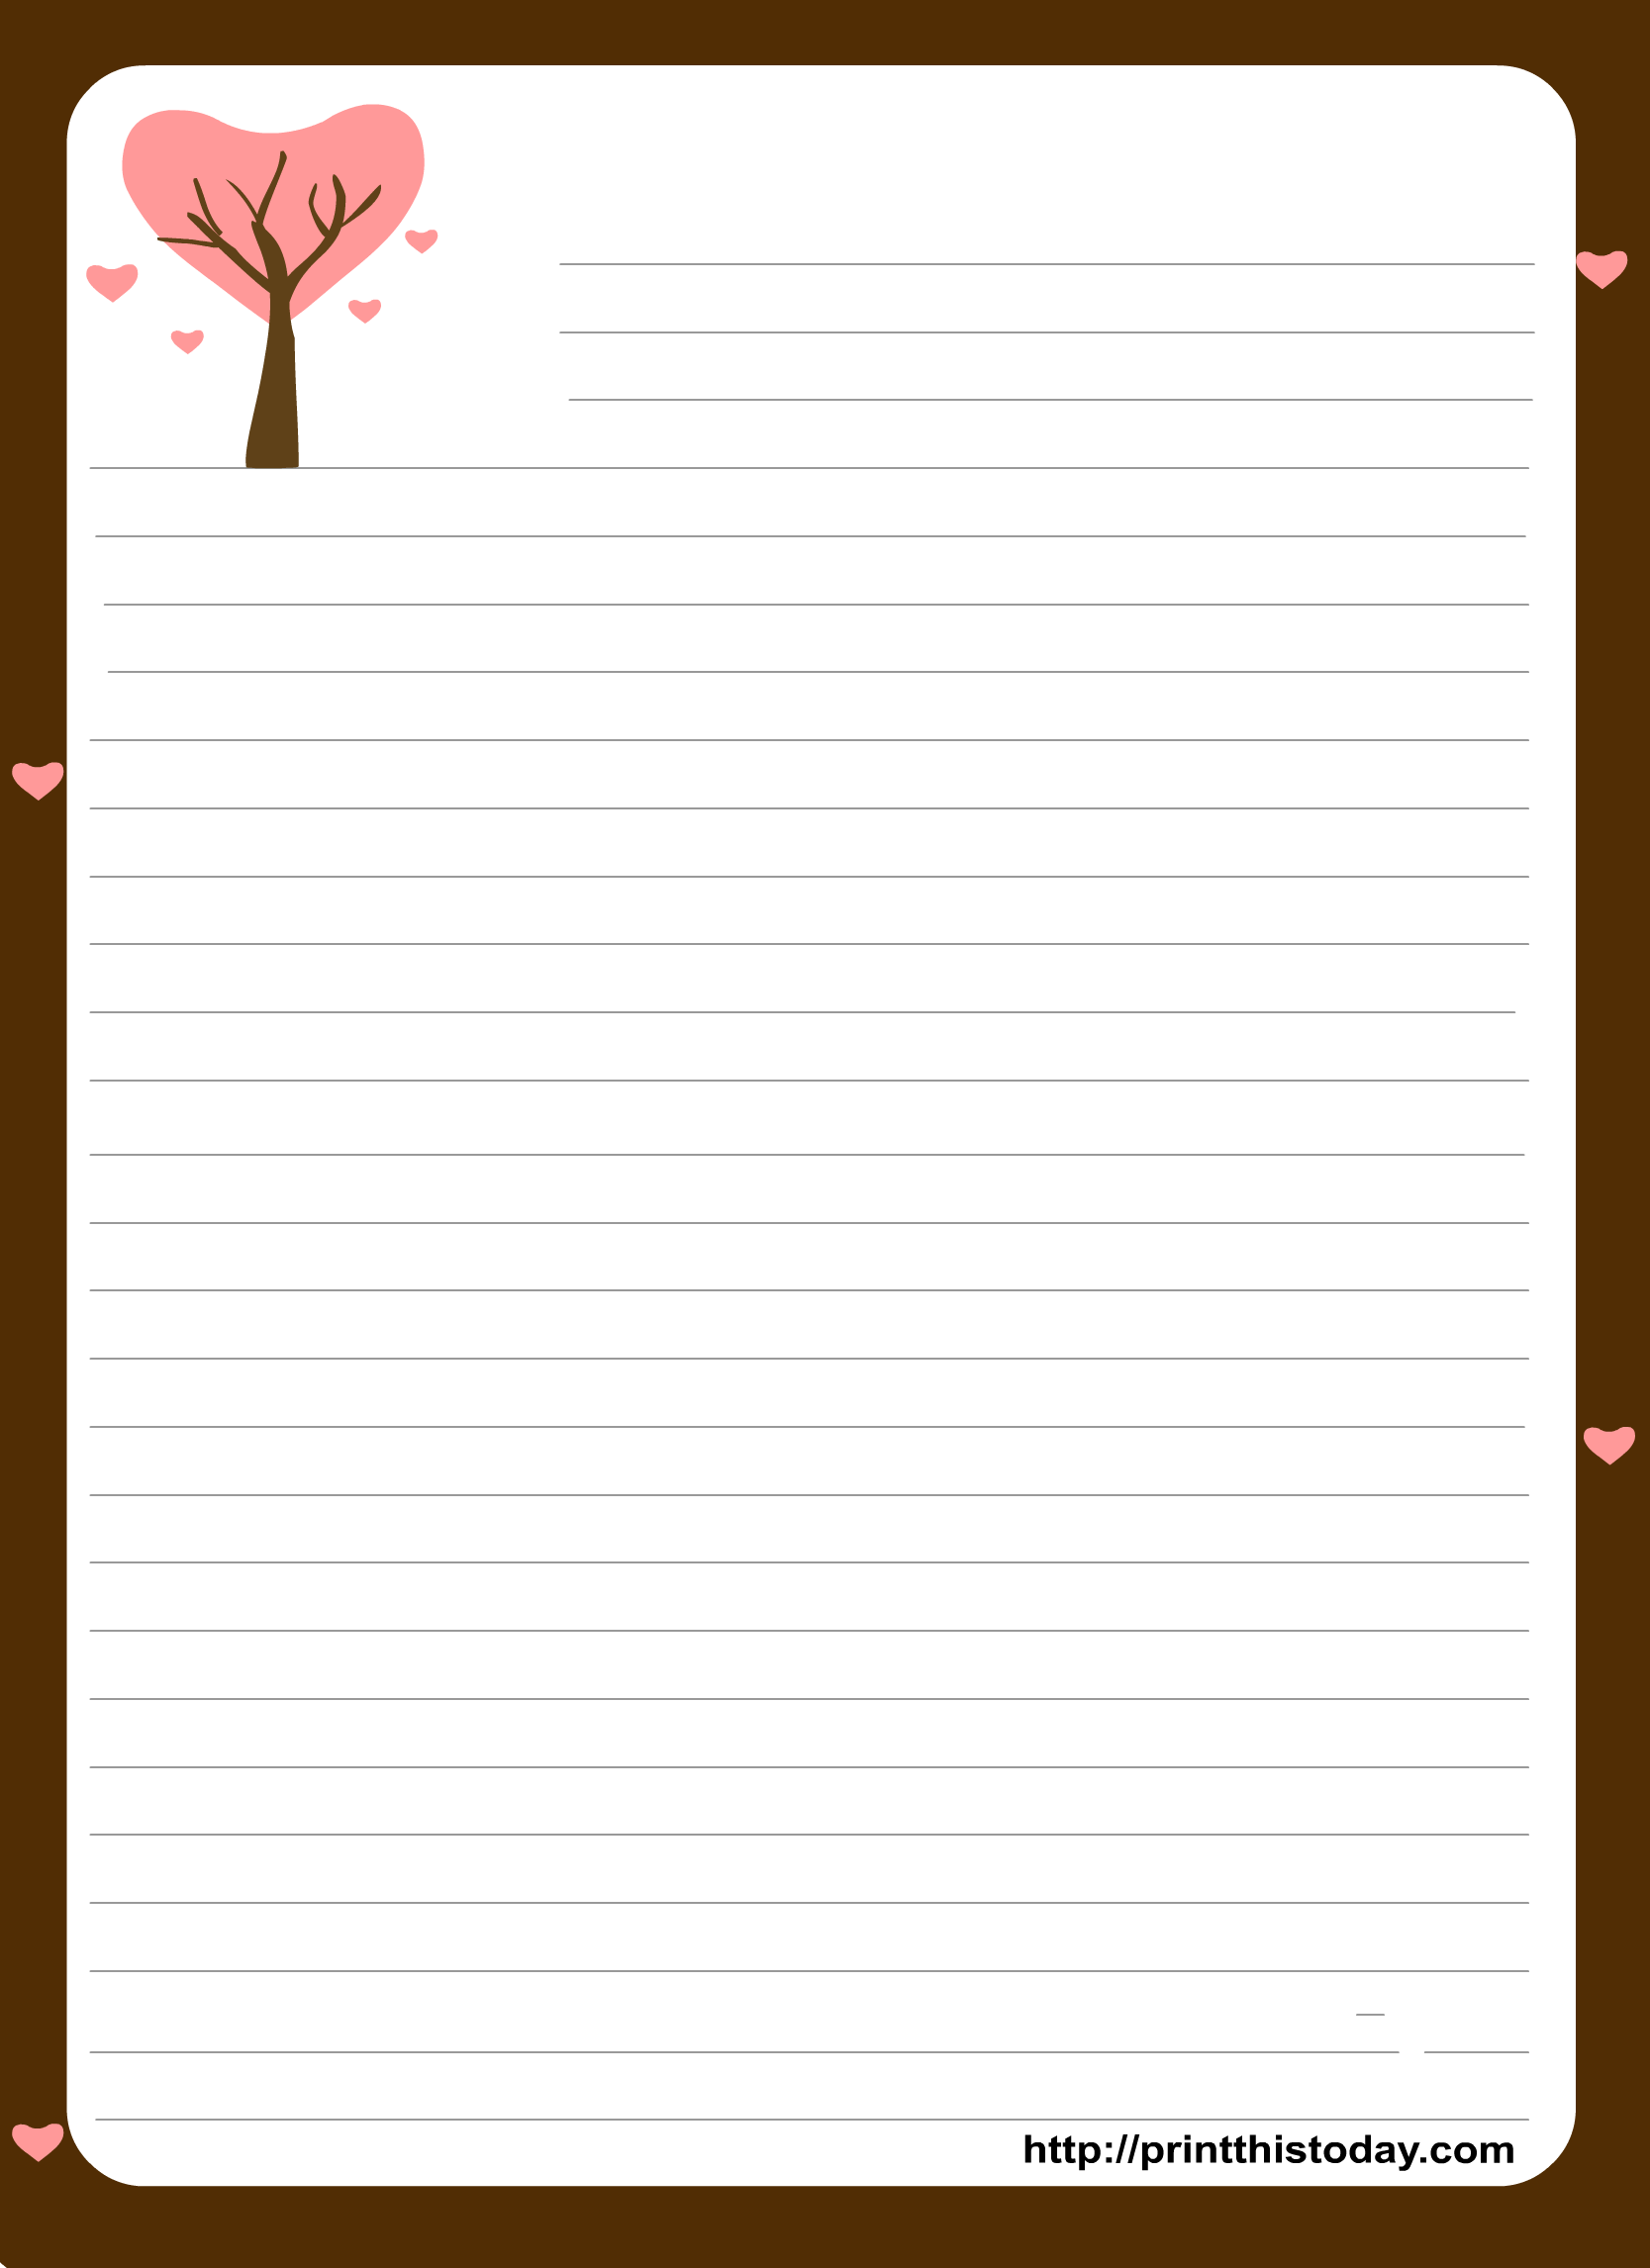 Free Printable Love Letter Pad Stationery with Free Printable Love Letter Paper